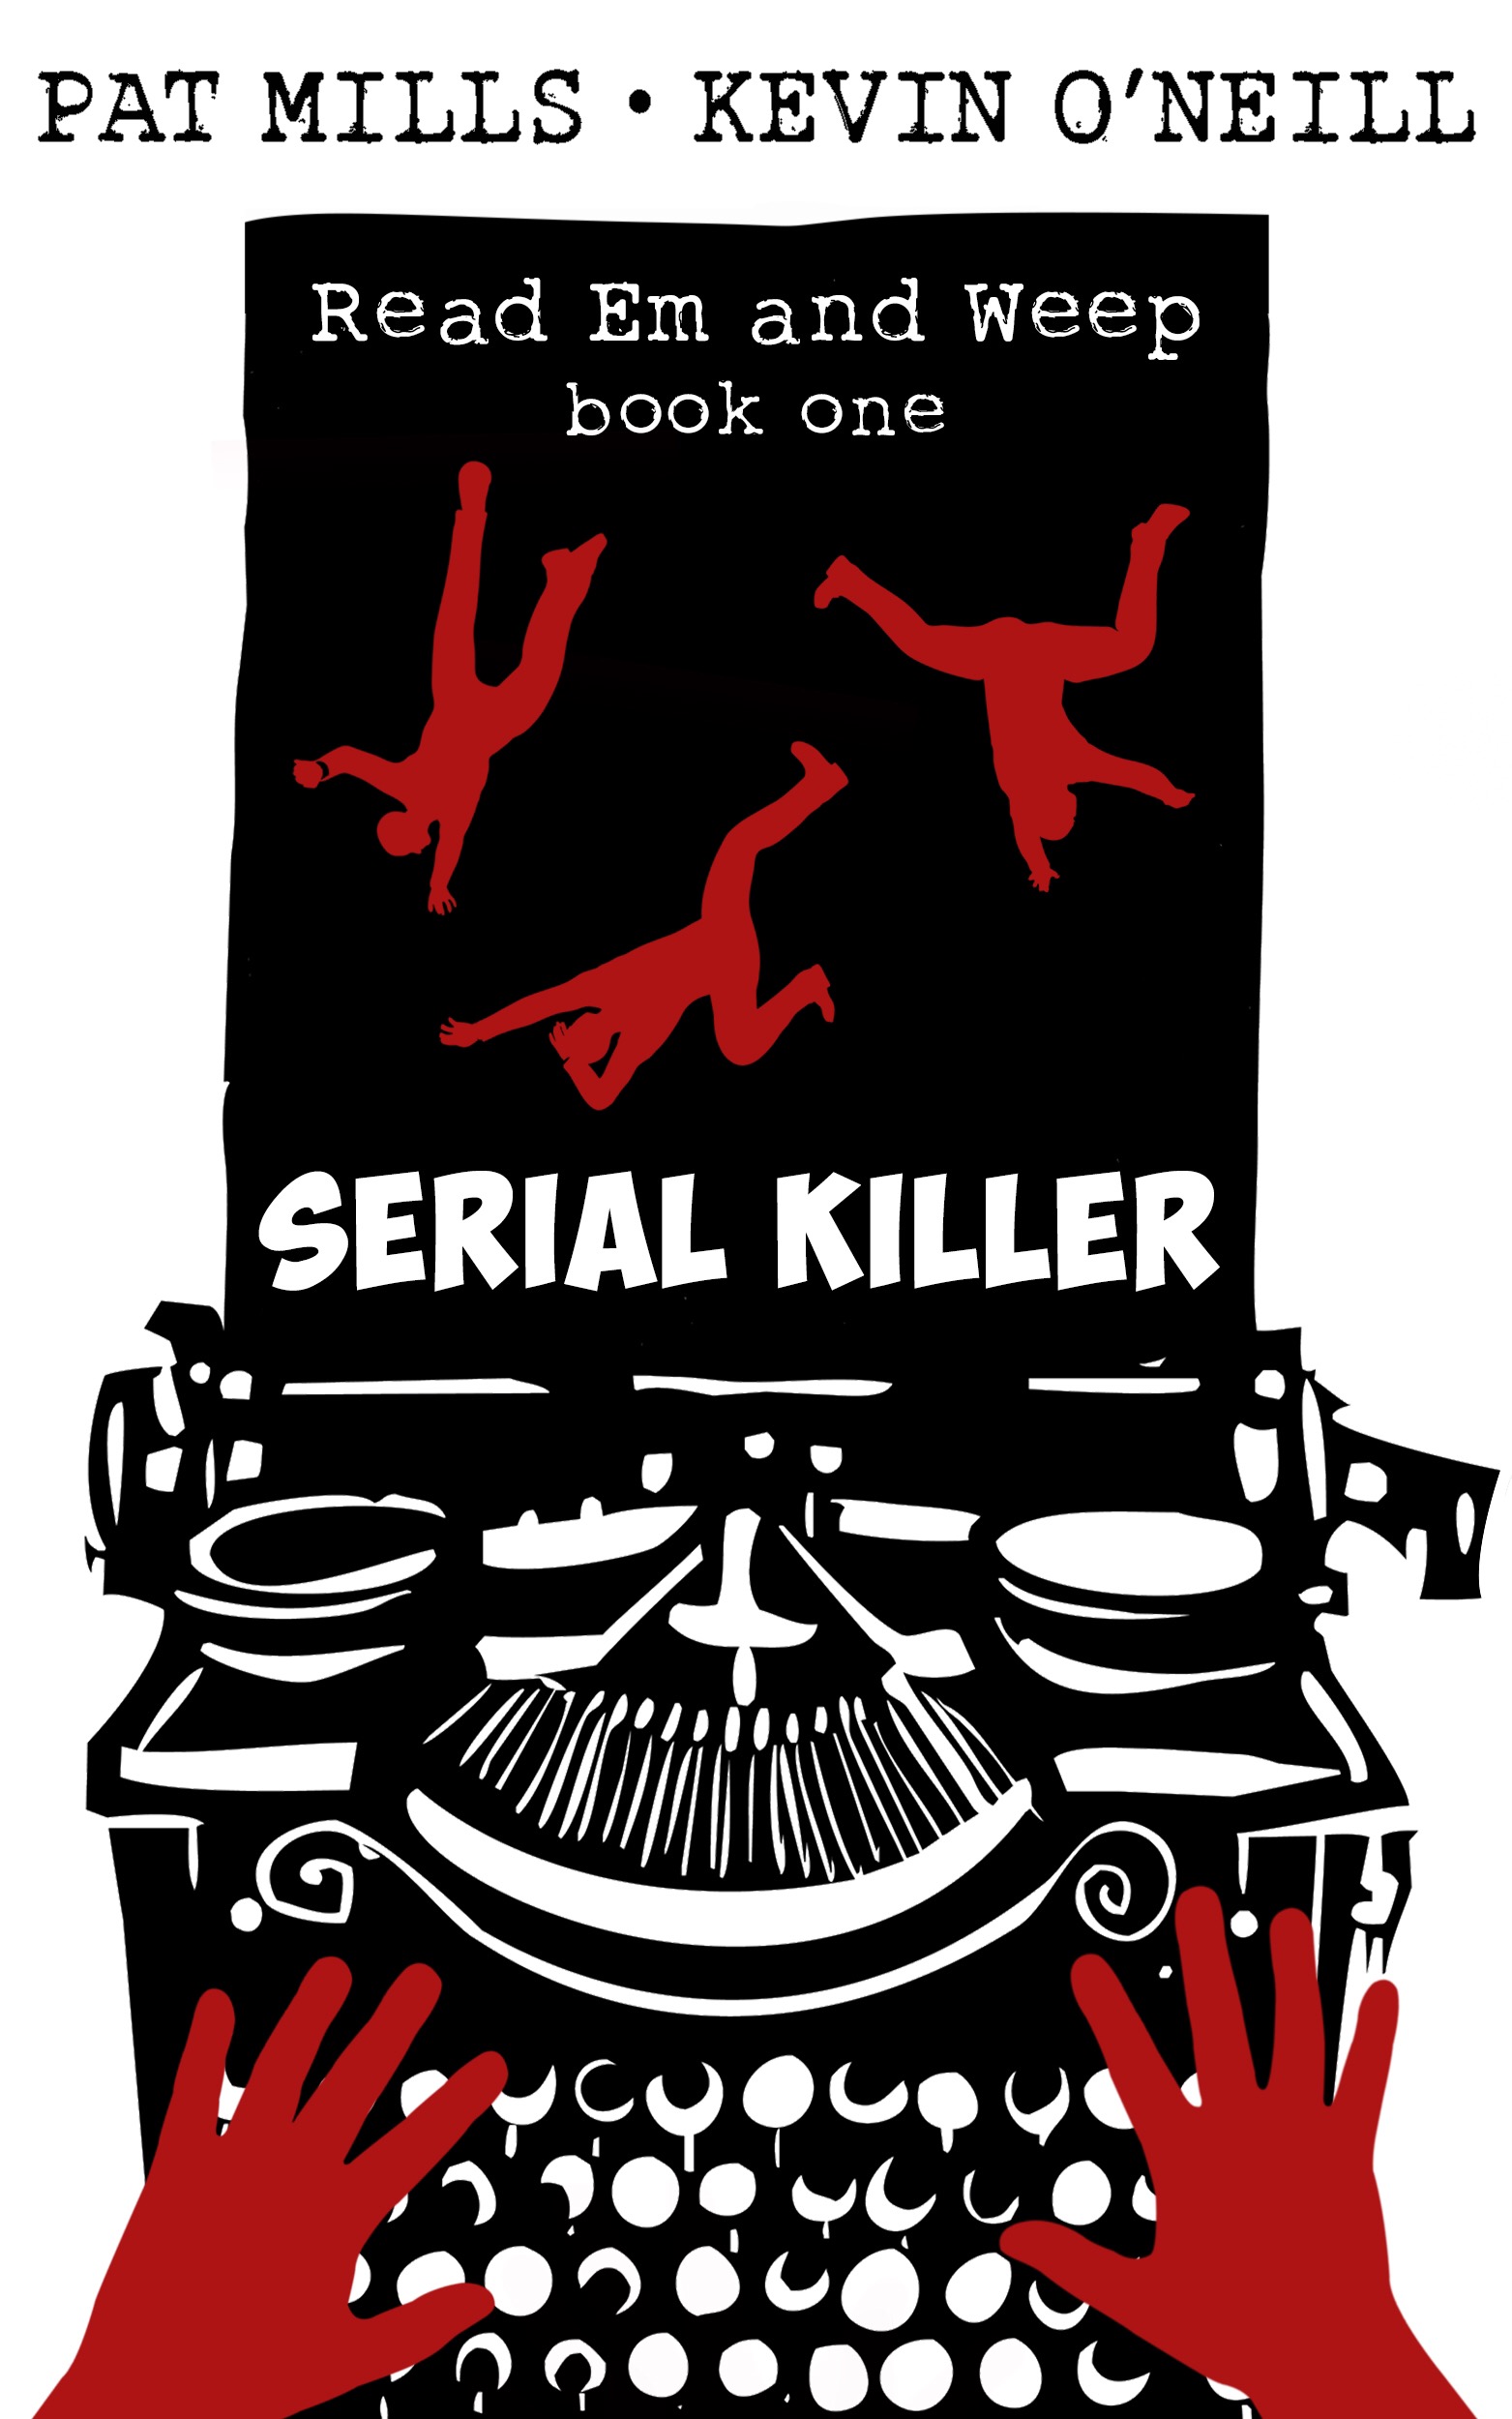 Read Em and Weep Book One - Serial Killer by Pat Mills and Kevin O'Neill - Cover